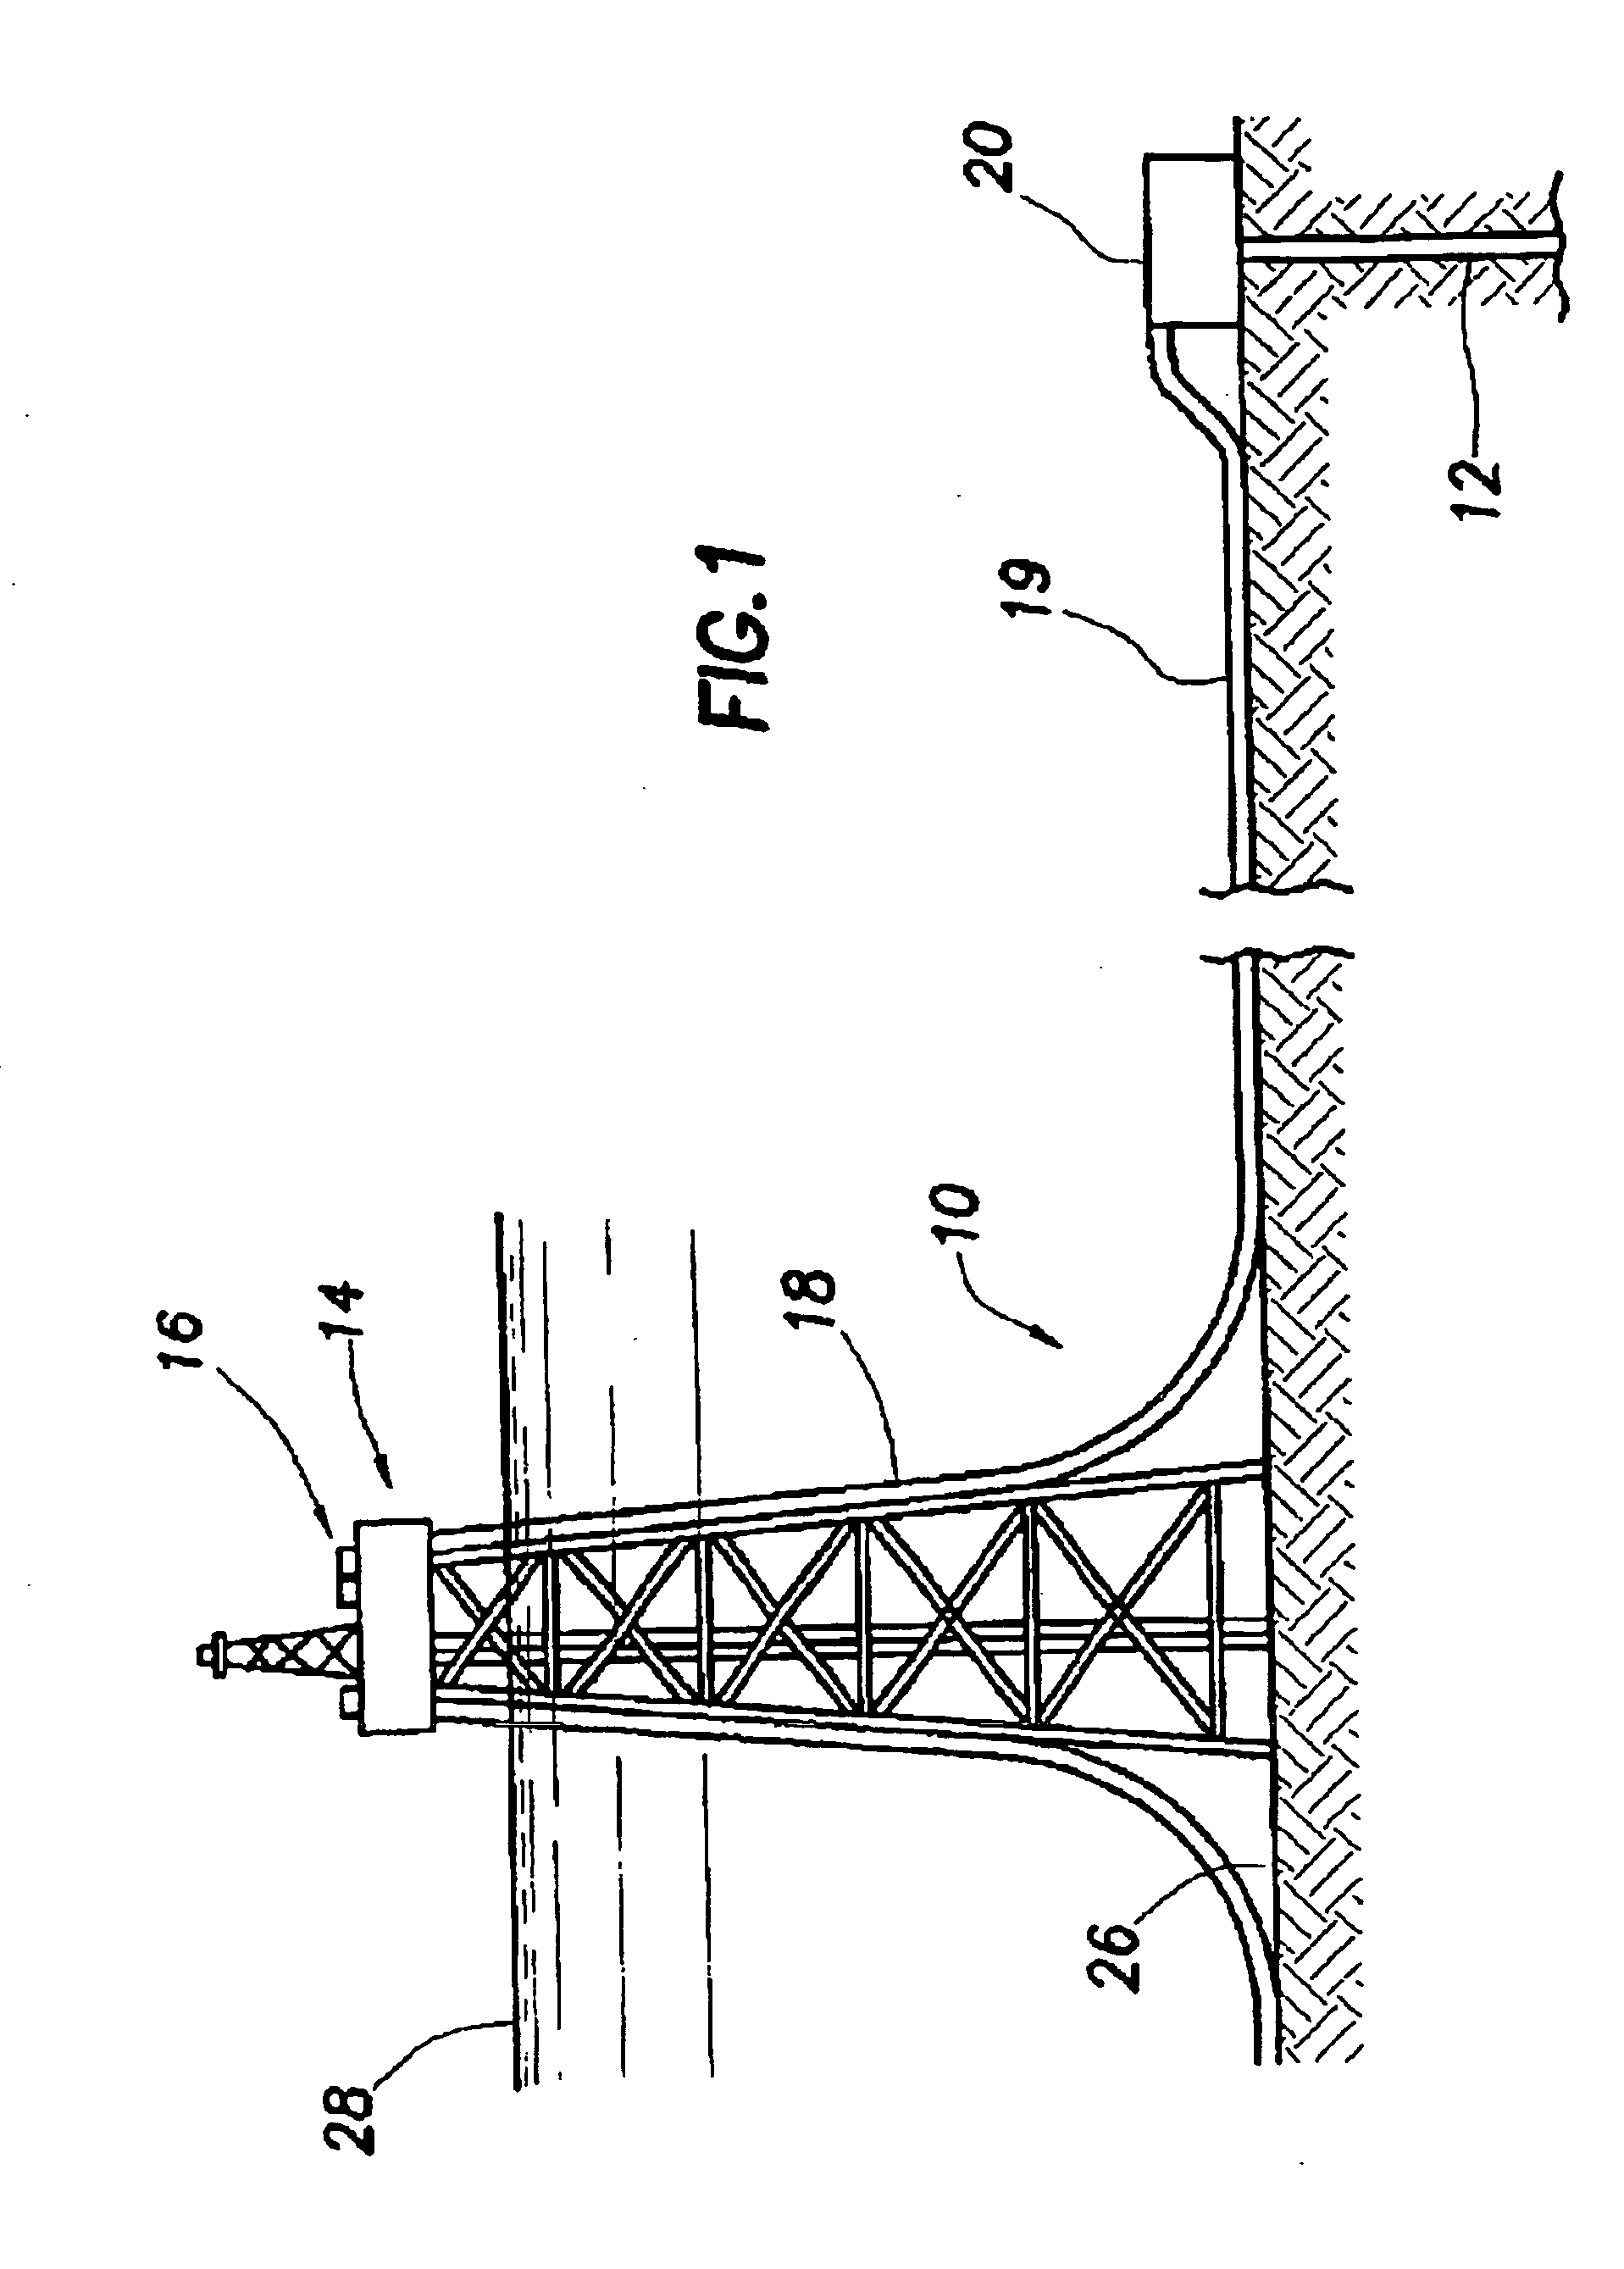 Pipes, systems, and methods for transporting hydrocarbons